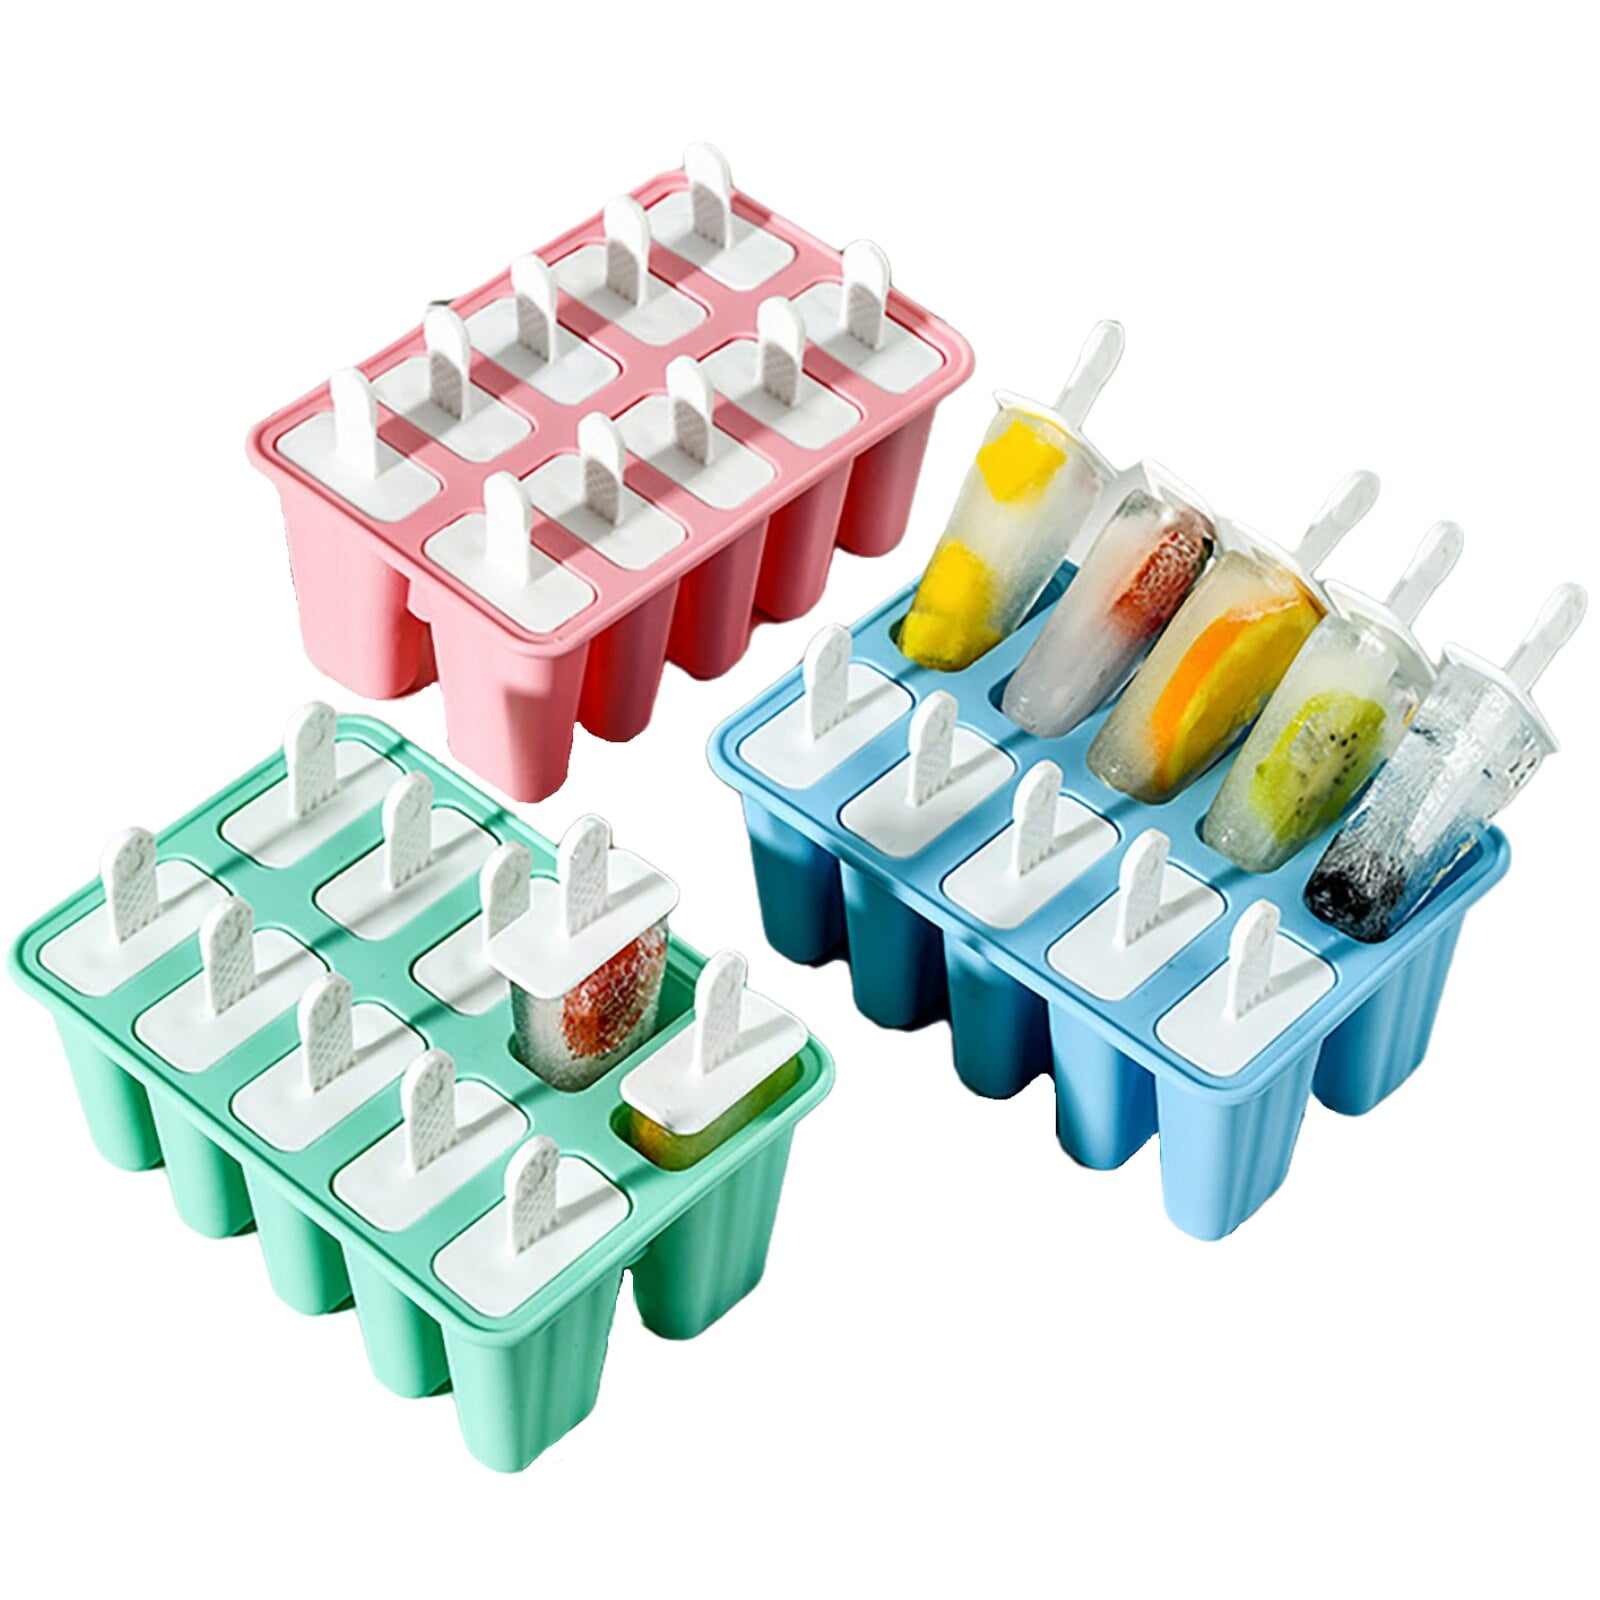 Ozera Popsicles Molds, 10-Cavity Popsicle Maker Molds Silicone Popsicle  Molds, Homemade Popcical Molds Ice Pop Molds with 50 Popsicle Sticks, 50